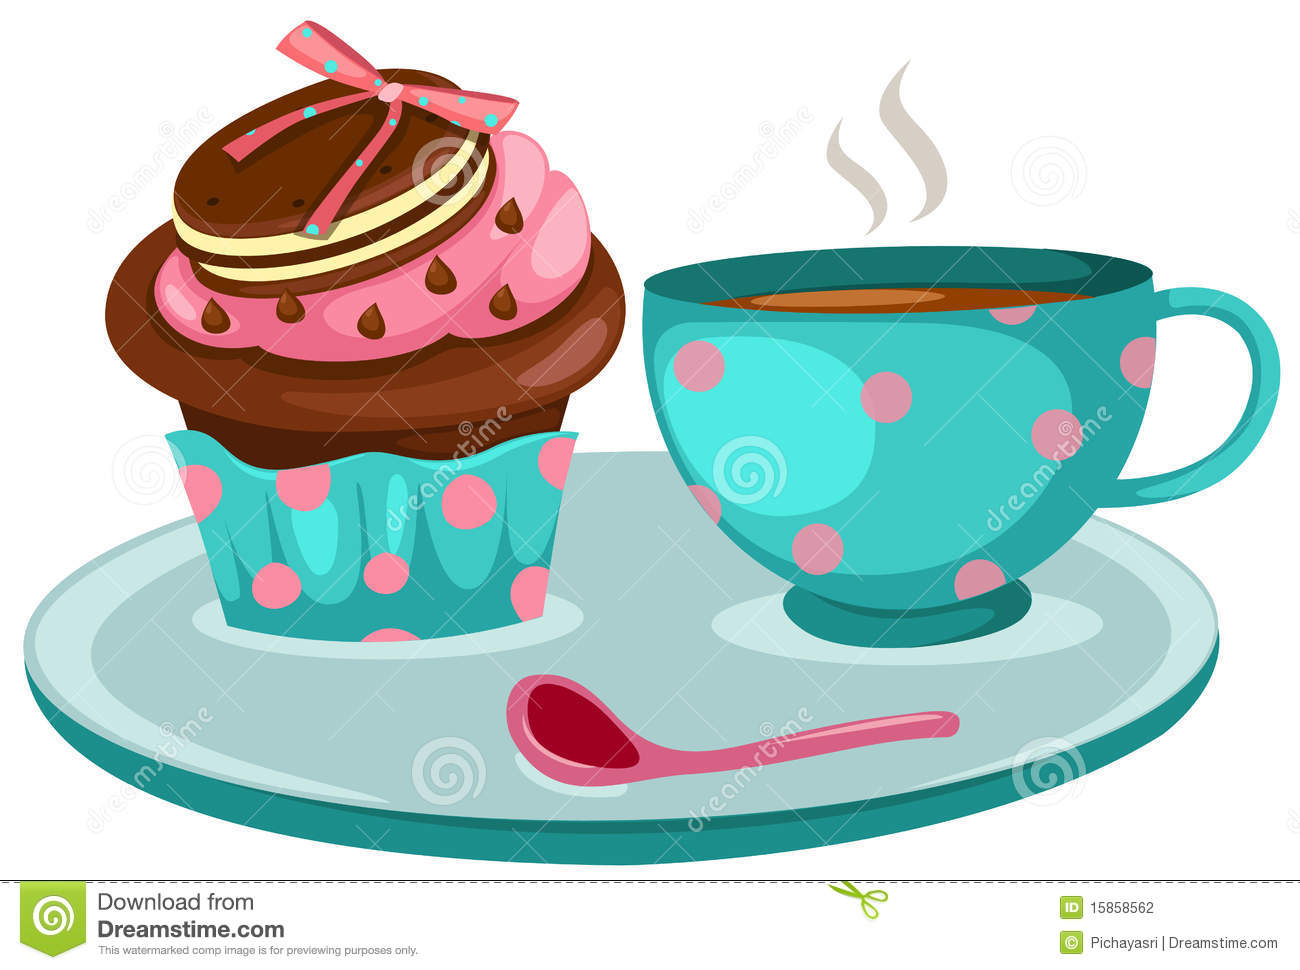 Pin Two Candle Cupcake Clipart Birthday Cake Cake On Pinterest